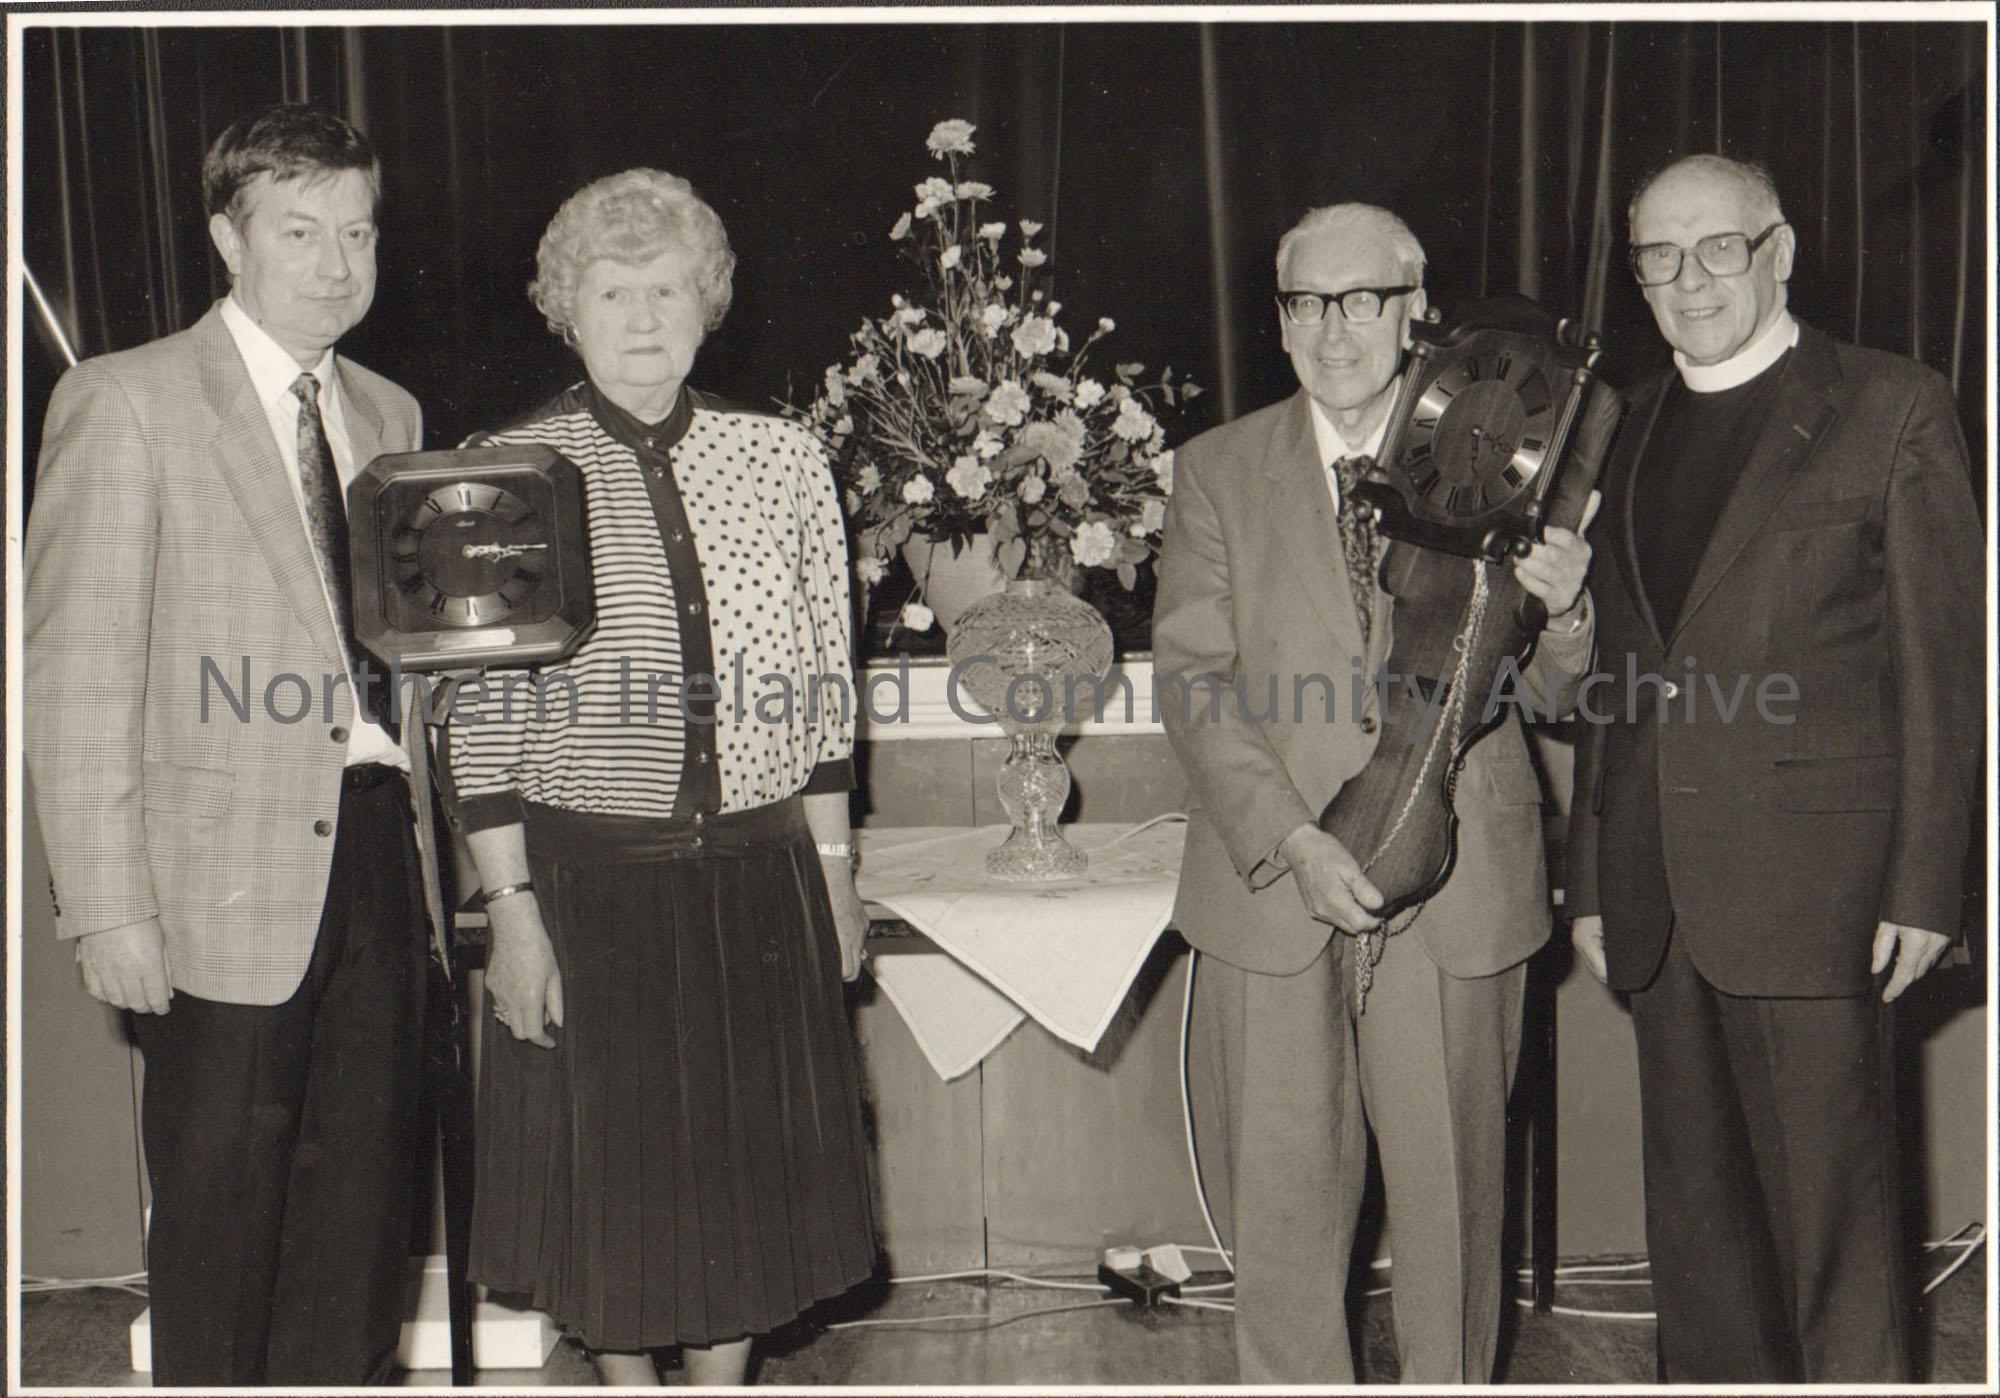 Black and white photograph of four people, including Molly Holmes and James McAfee. Two people are holding clocks. Taken in the Town hall auditorium